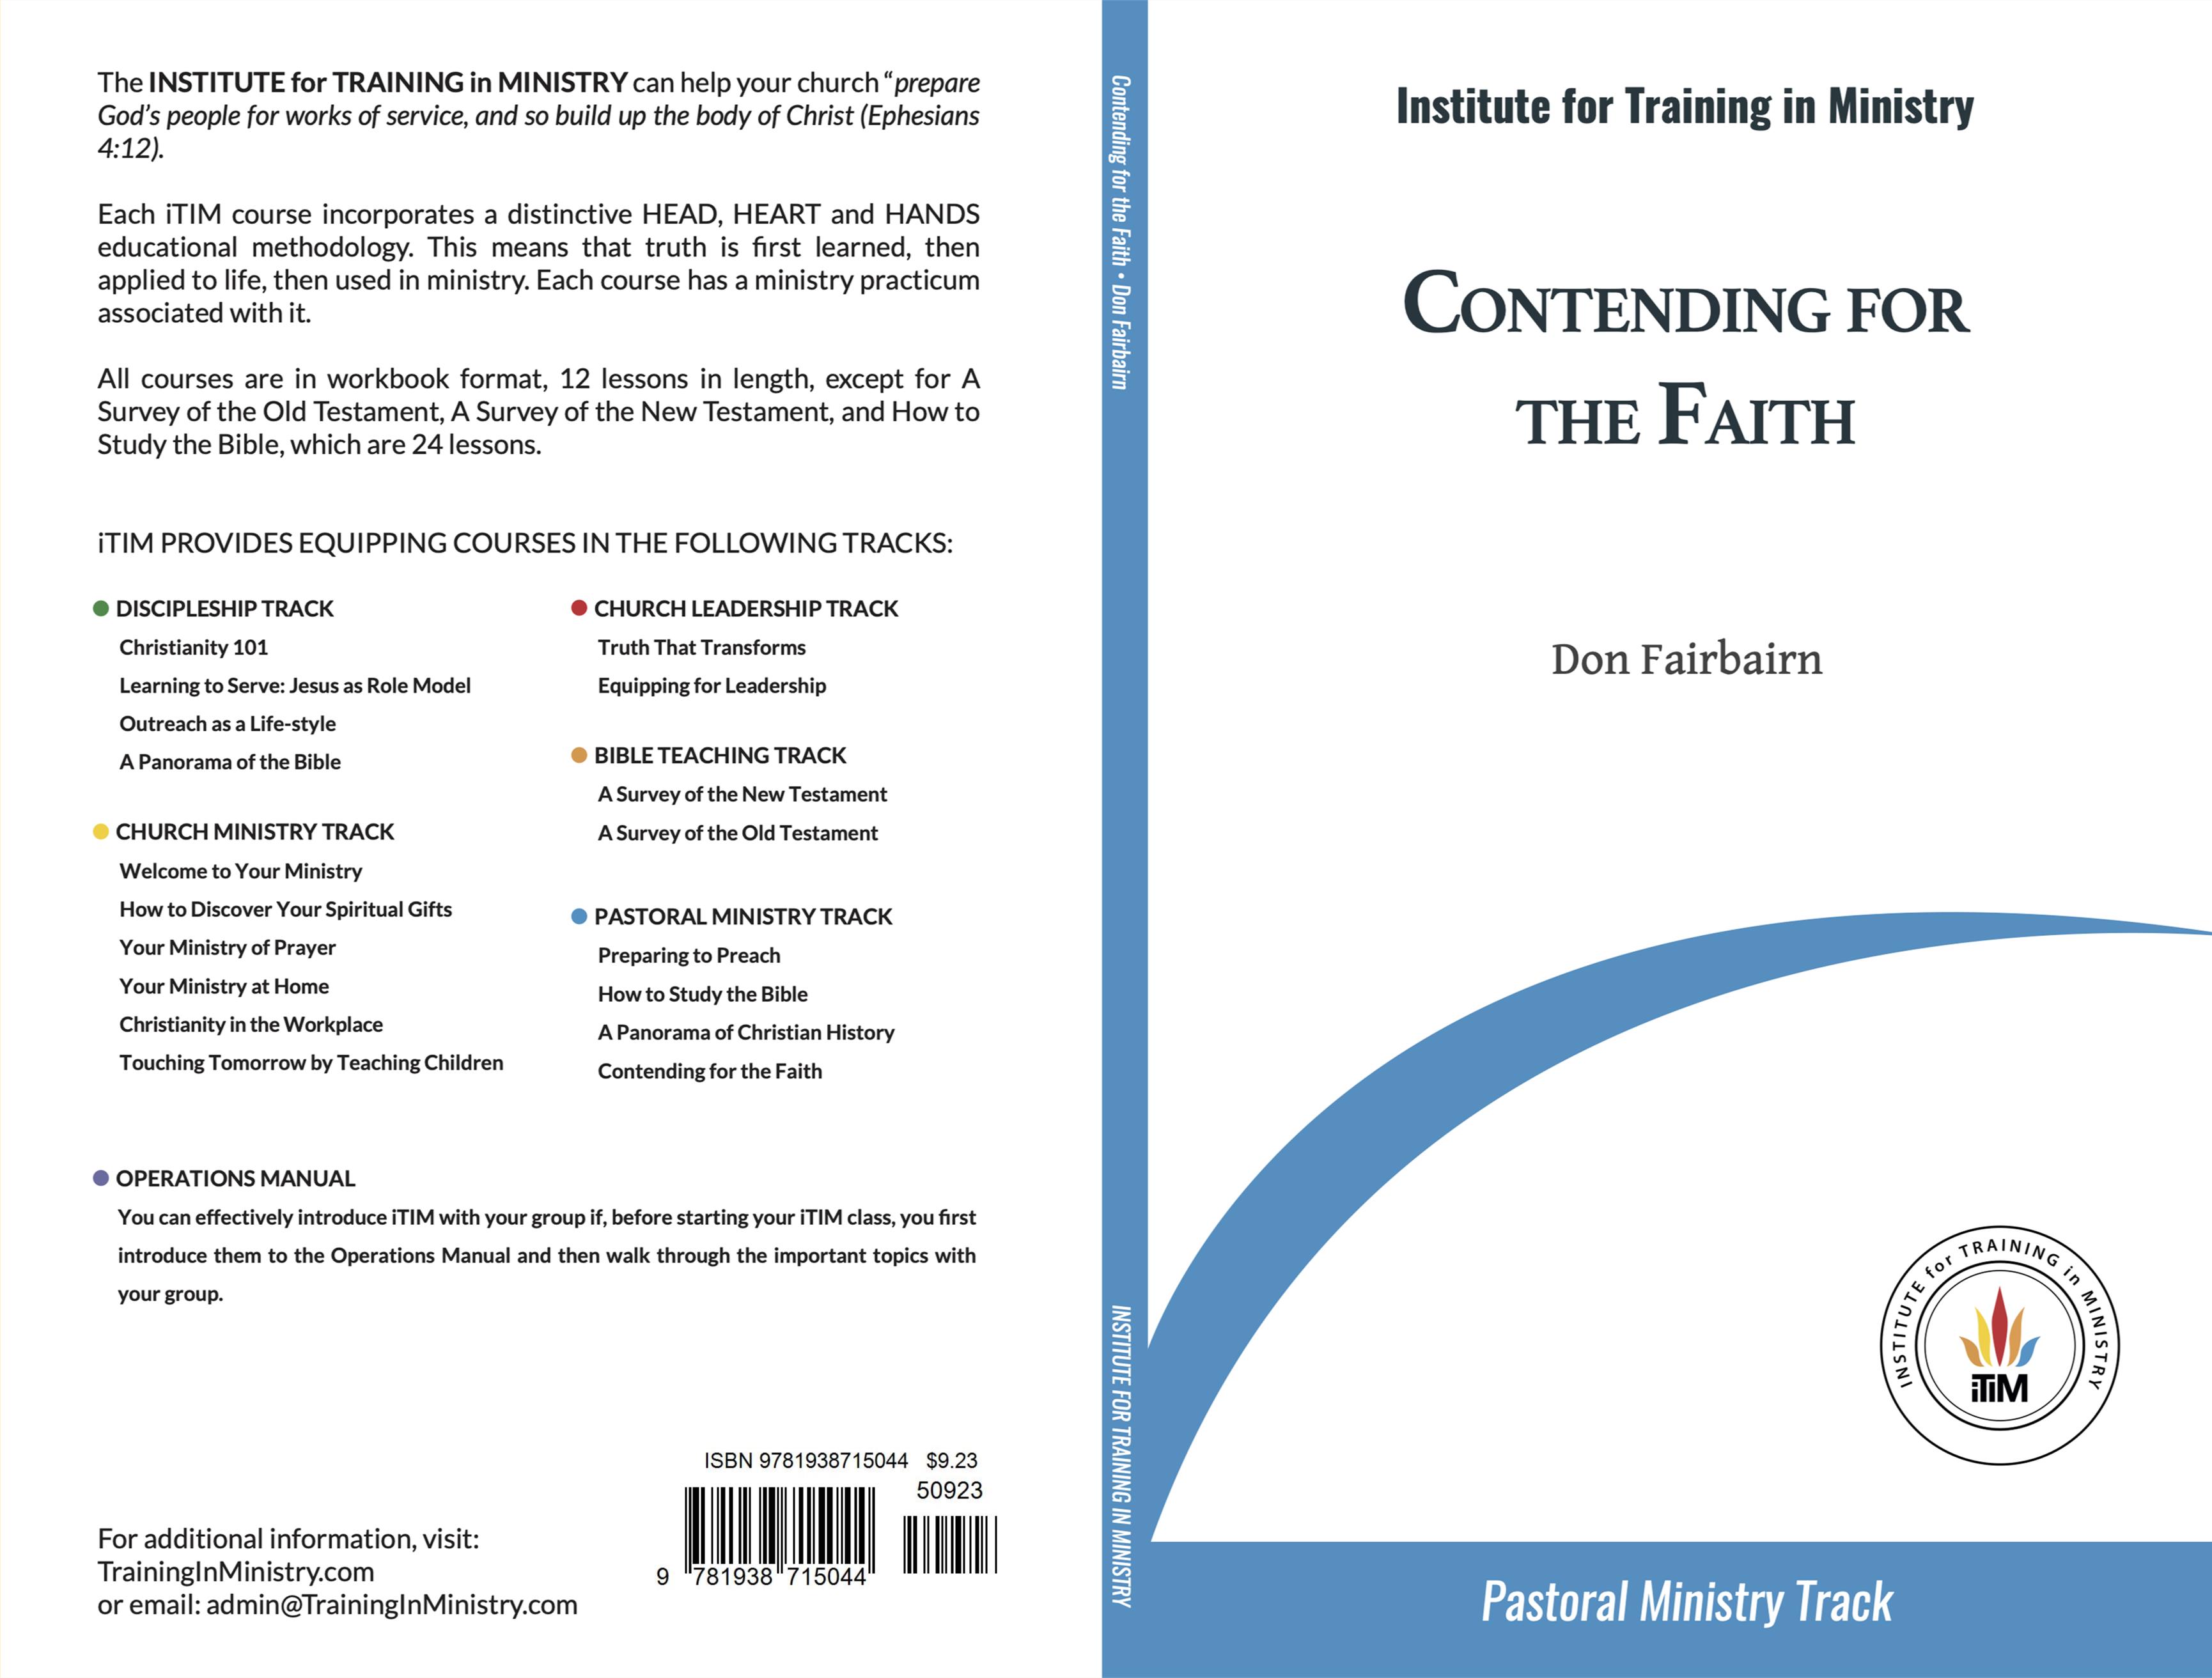 Contending for the Faith cover image